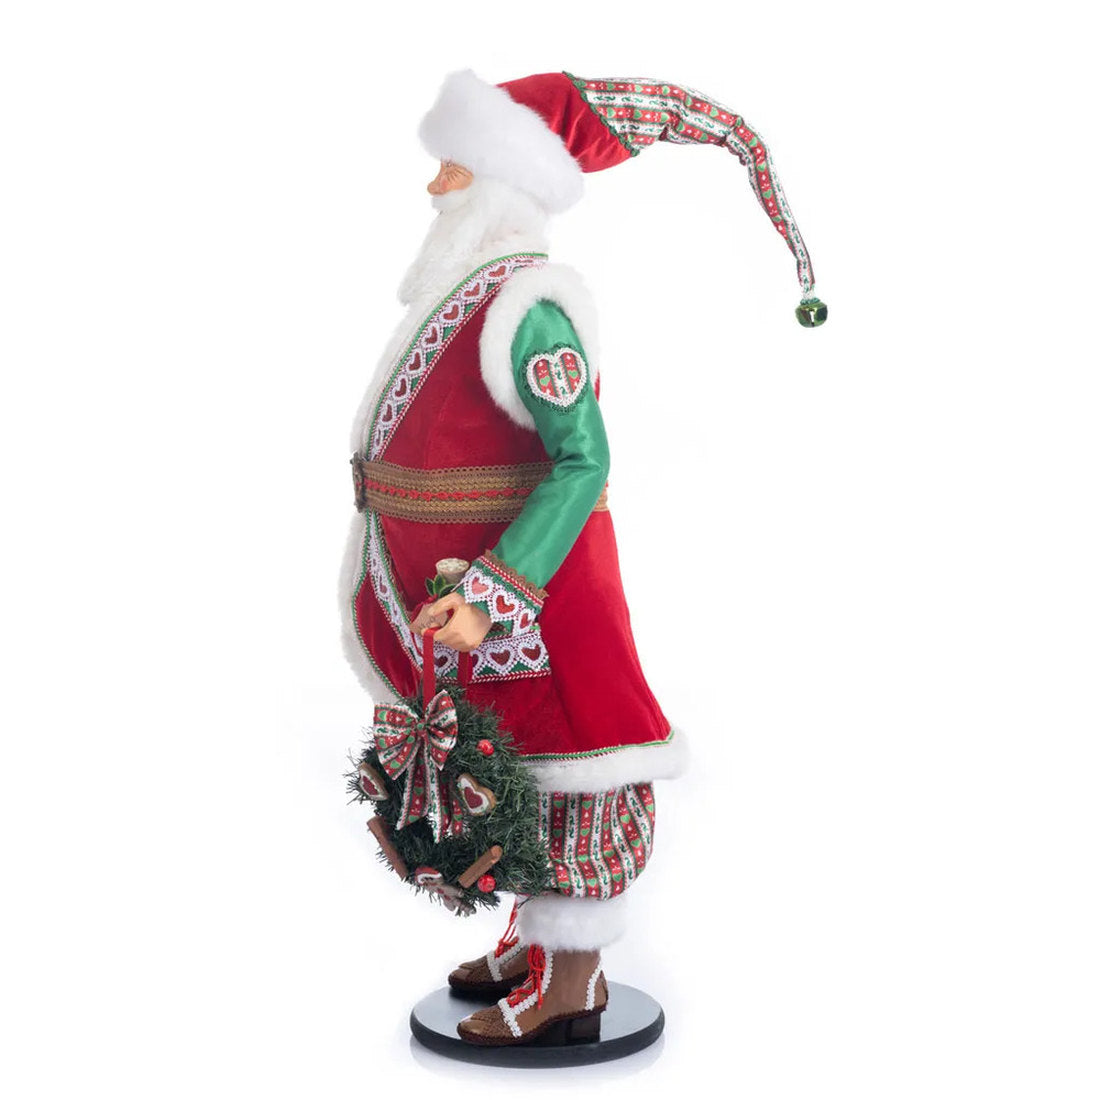 Acquista in Italia Katherine's Collection Seasoned Greering Babbo Natale KC-28-328725 North Pole Christmas Shop